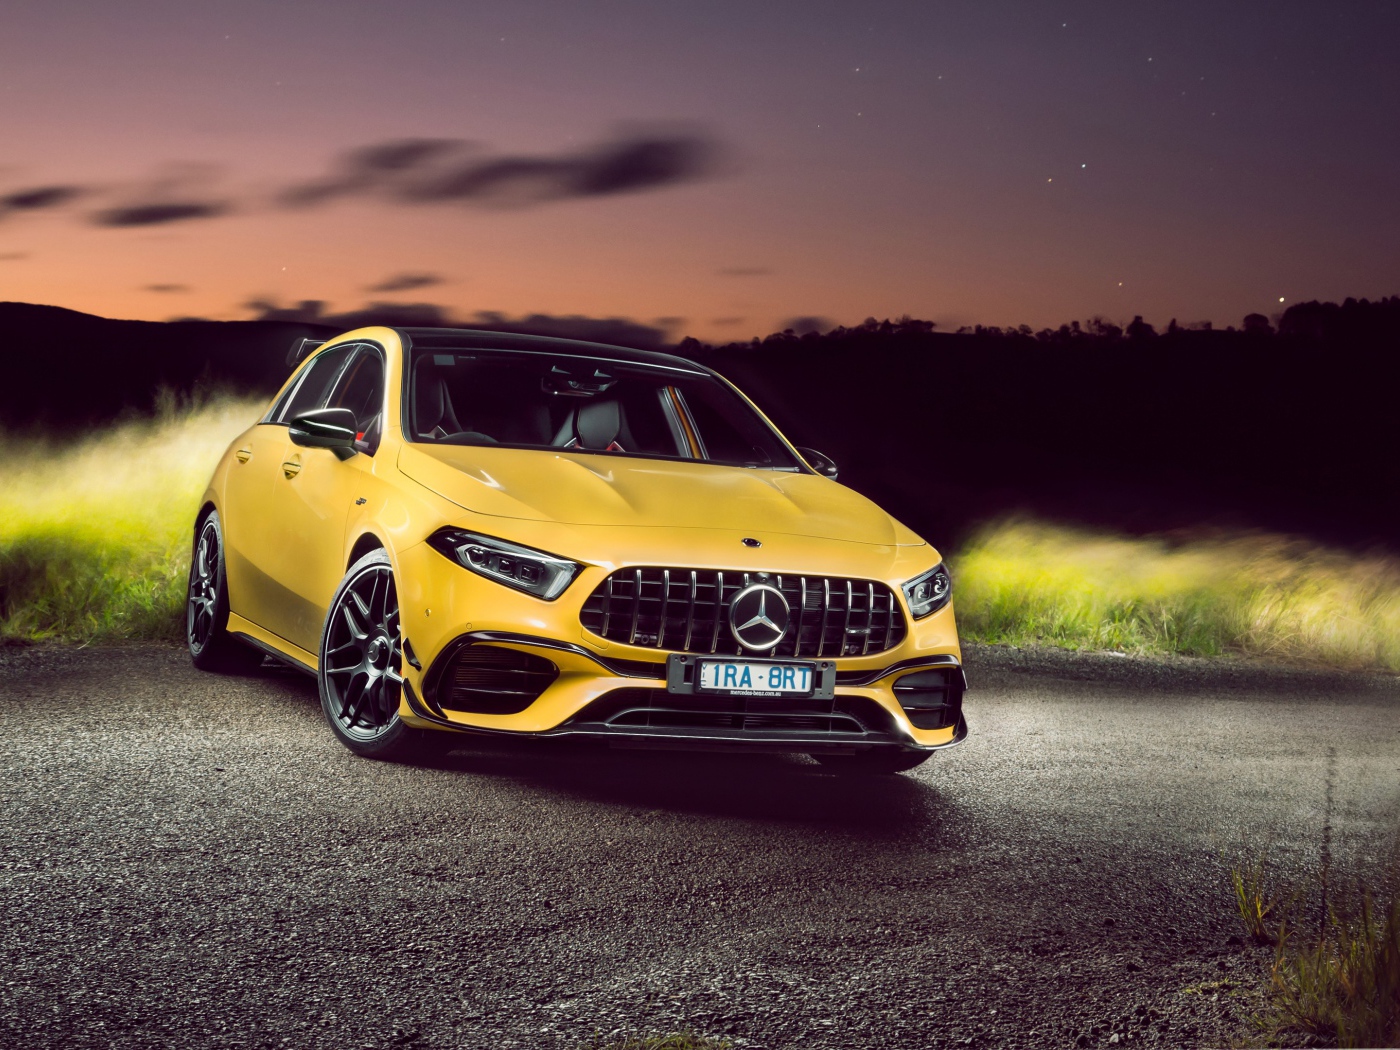 Yellow Mercedes-AMG A 45 S 4MATIC Aerodynamic Package 2020 at night